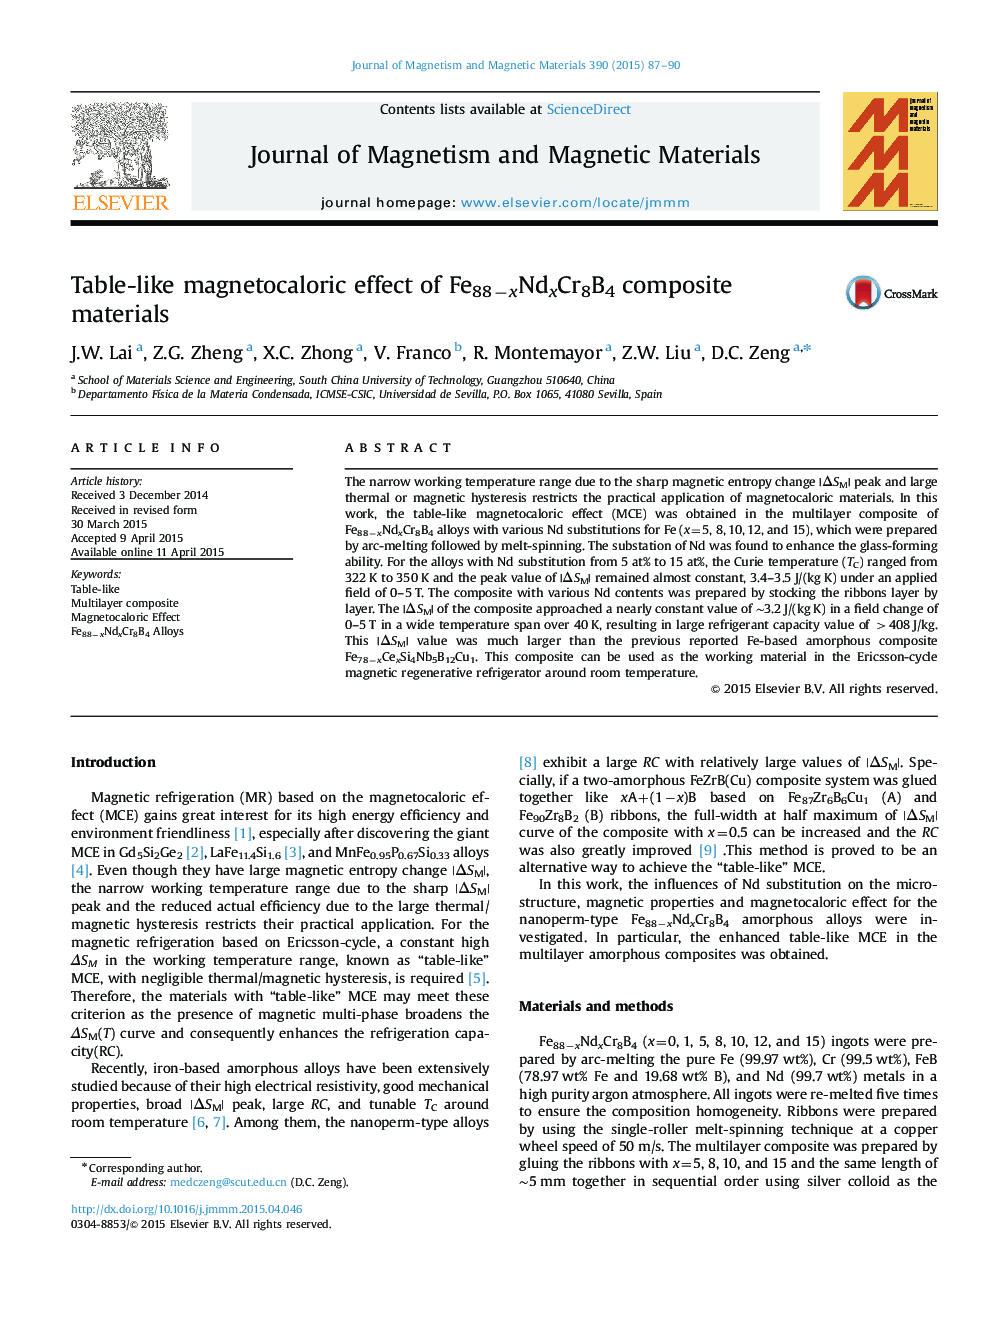 Table-like magnetocaloric effect of Fe88âxNdxCr8B4 composite materials